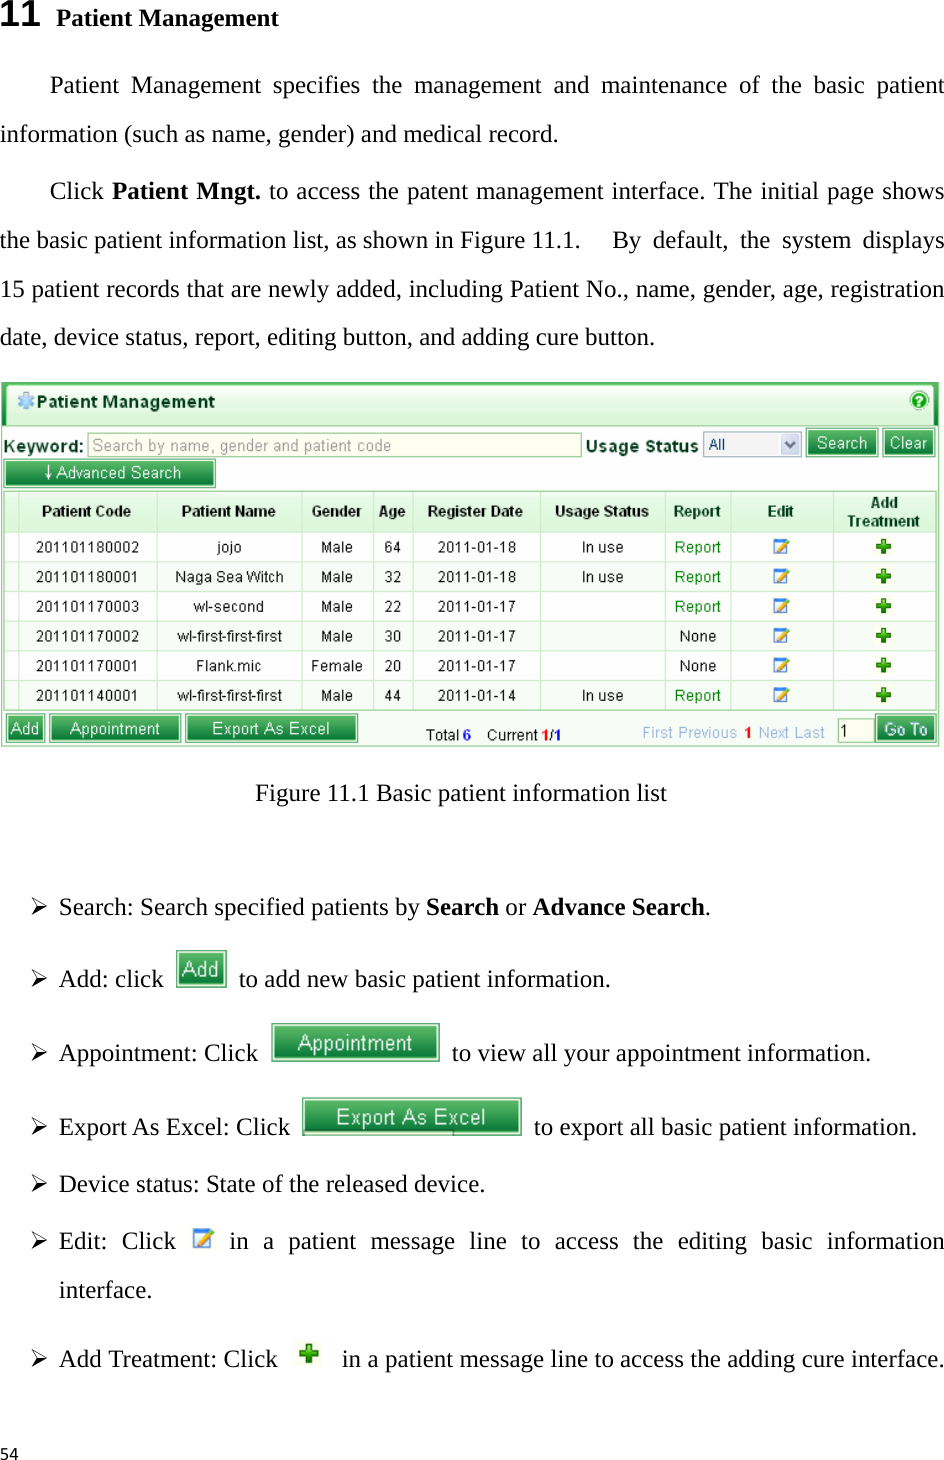 5411  Patient Management Patient Management specifies the management and maintenance of the basic patient information (such as name, gender) and medical record.   Click Patient Mngt. to access the patent management interface. The initial page shows the basic patient information list, as shown in Figure 11.1.   By default, the system displays 15 patient records that are newly added, including Patient No., name, gender, age, registration date, device status, report, editing button, and adding cure button.    Figure 11.1 Basic patient information list  ¾ Search: Search specified patients by Search or Advance Search.   ¾ Add: click    to add new basic patient information.   ¾ Appointment: Click    to view all your appointment information.   ¾ Export As Excel: Click    to export all basic patient information.   ¾ Device status: State of the released device.   ¾ Edit: Click   in a patient message line to access the editing basic information interface.  ¾ Add Treatment: Click    in a patient message line to access the adding cure interface. 